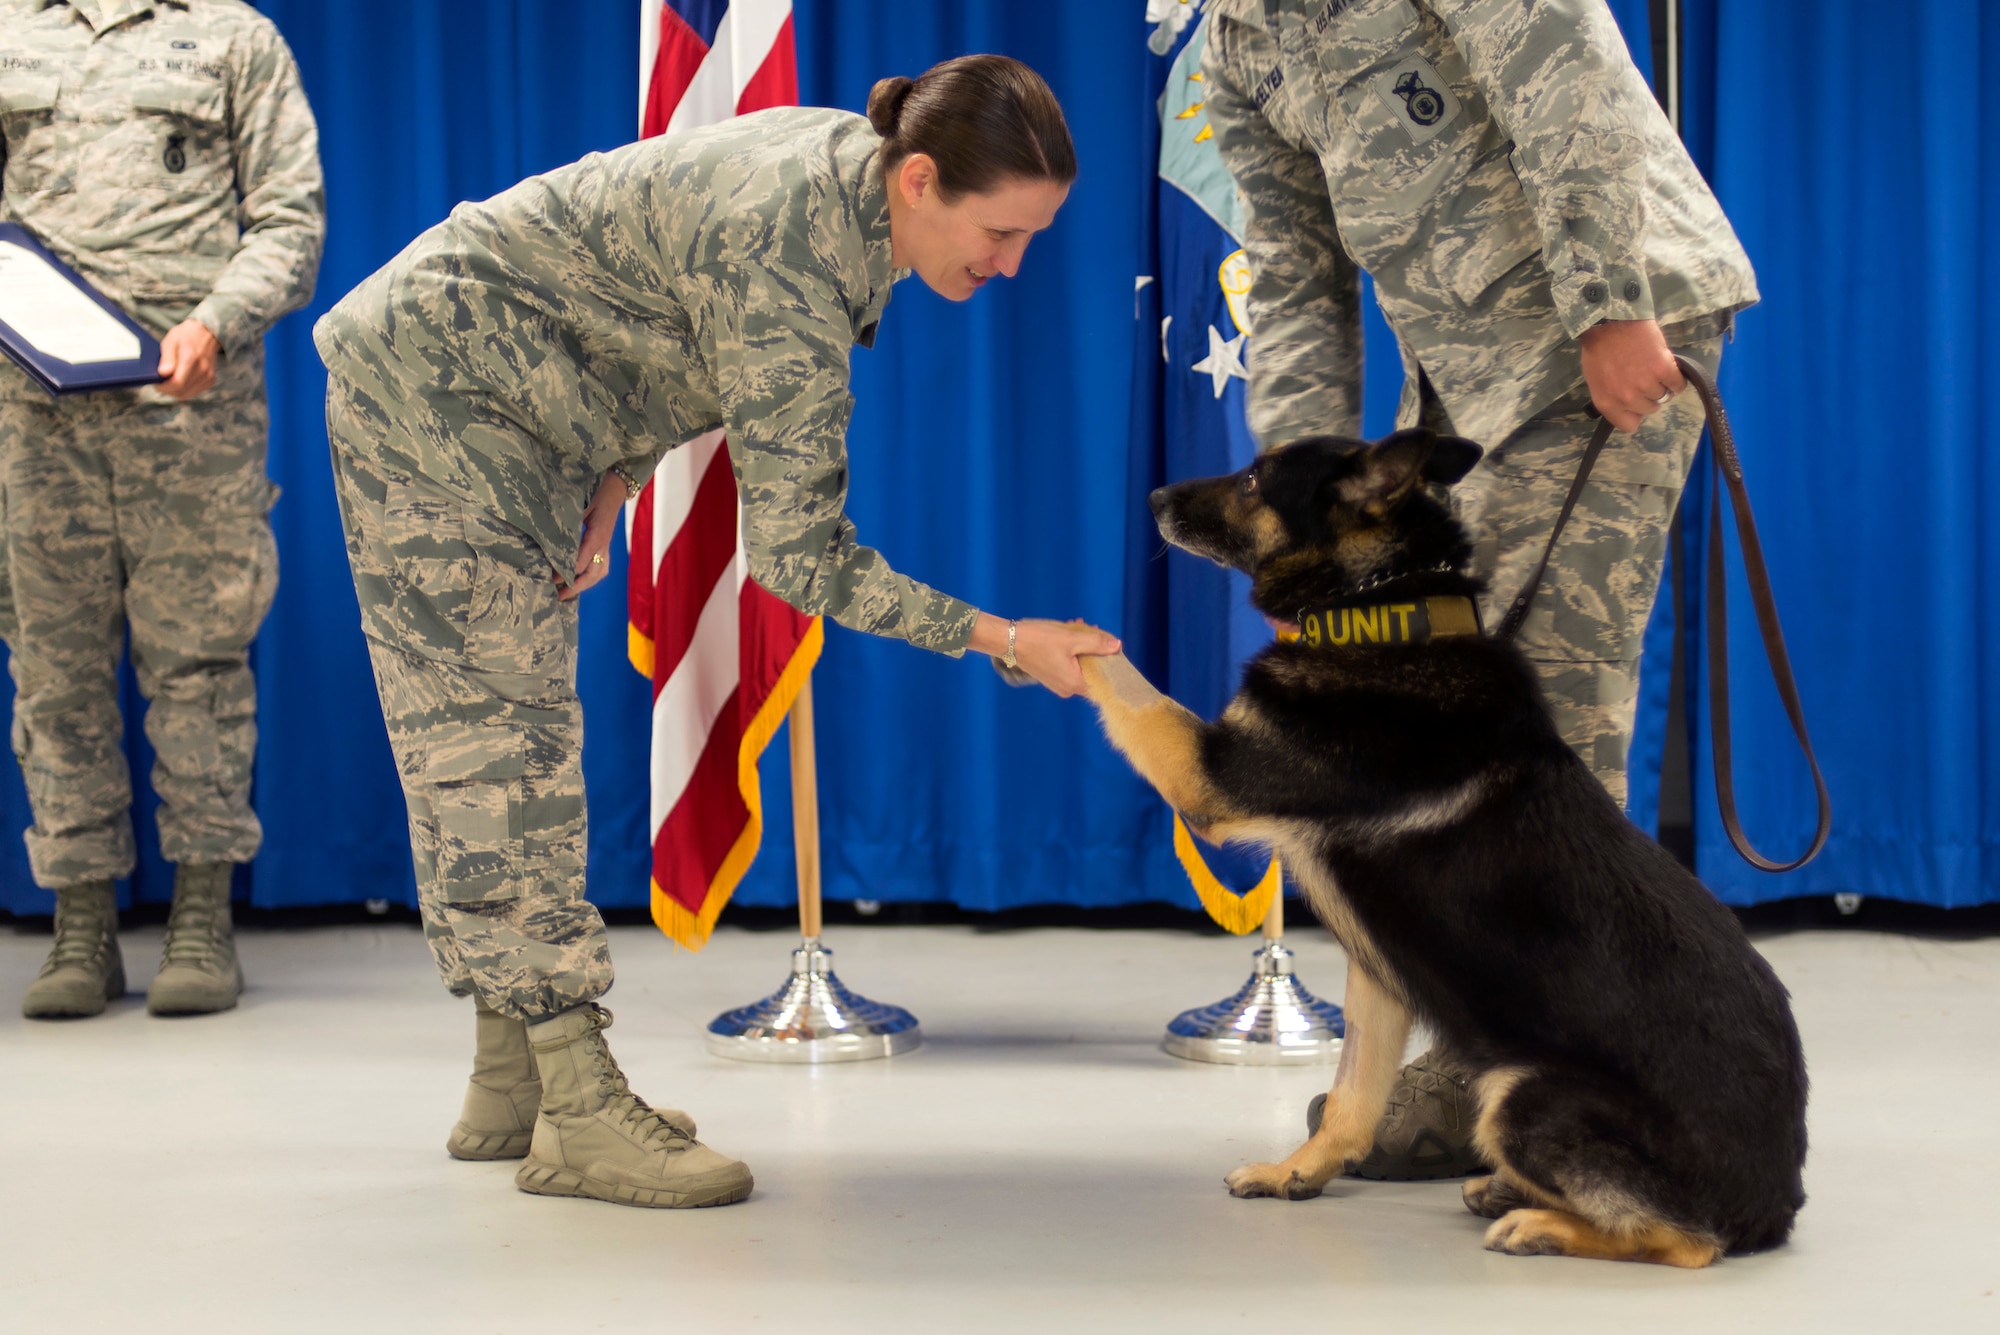 U.S. Air Force Lt. Col. Melissa Brown, commander of the 6th Security Forces Squadron, shakes paws with Apacs, a military working dog, during Apacs' retirement ceremony held at MacDill Air Force Base, Fla., March 9, 2018. Apacs retired with full ceremonial services after six years of service to the U.S. Air Force.